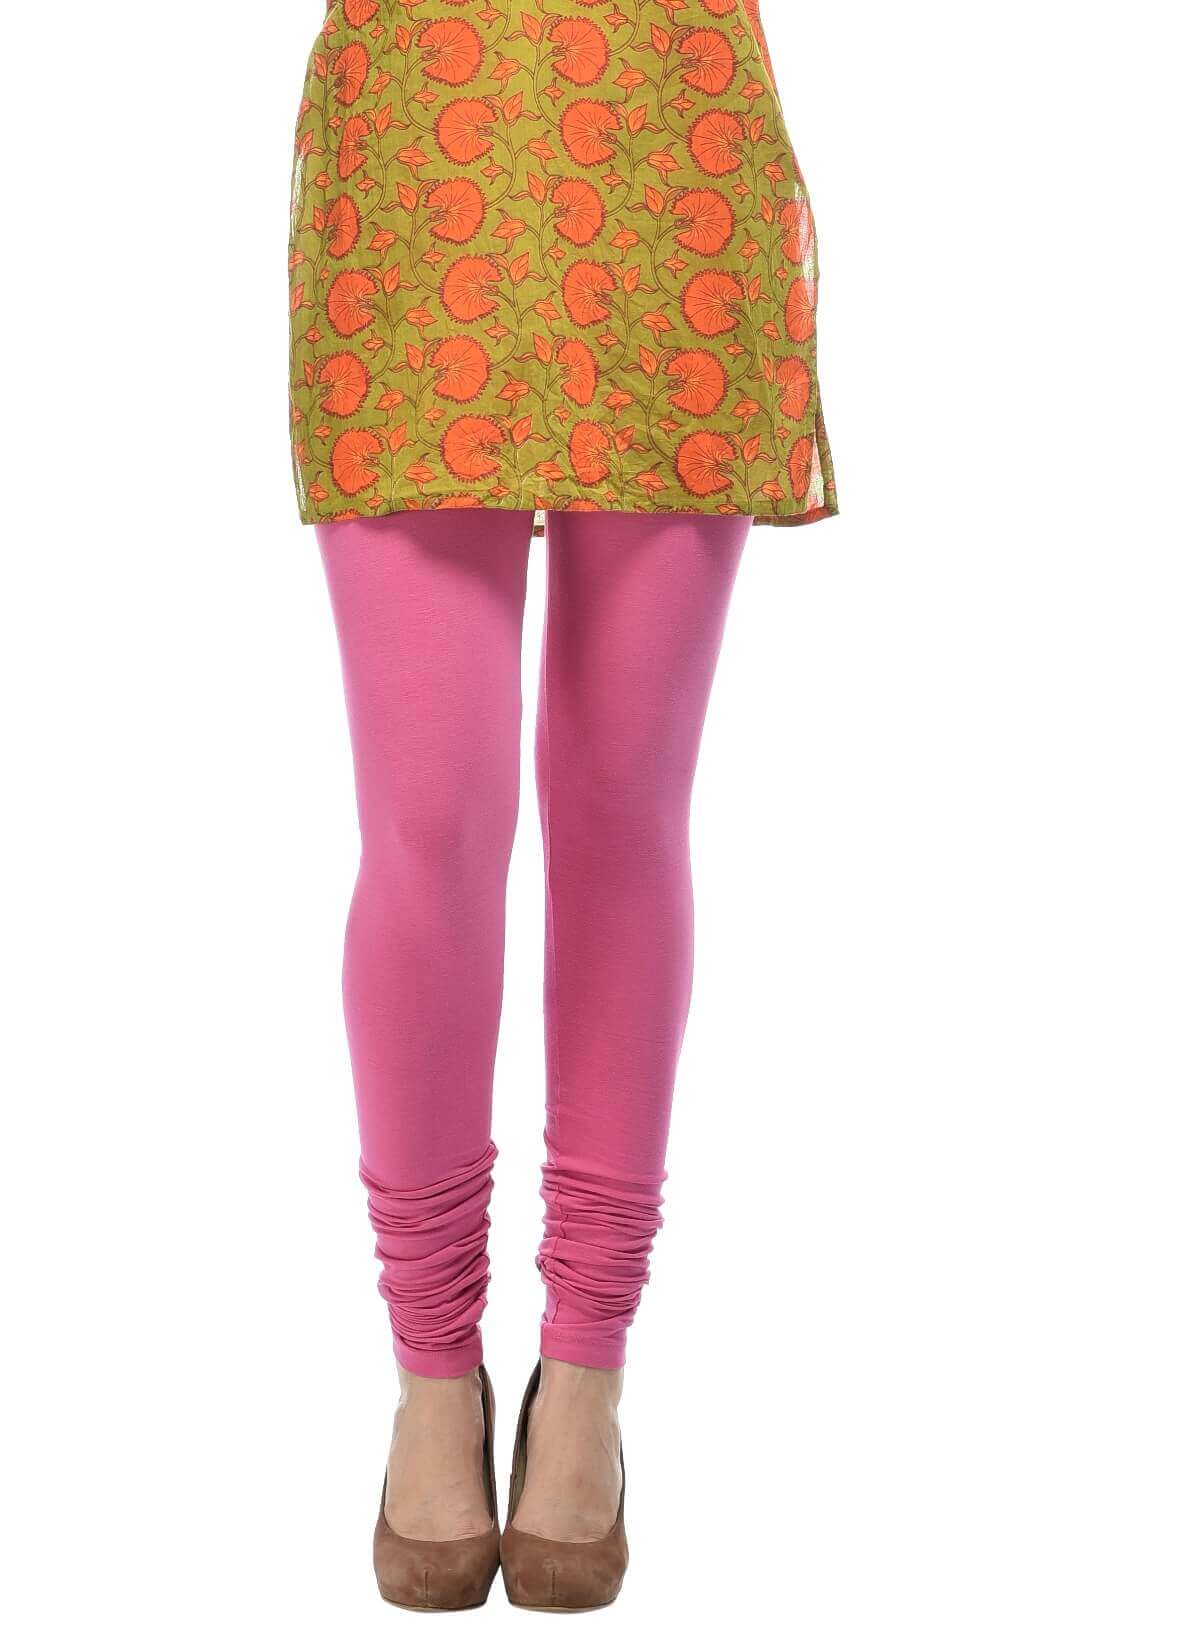 https://frenchtrendz.com/images/thumbs/0000635_frenchtrendz-cotton-spandex-pink-churidar-leggings.jpeg